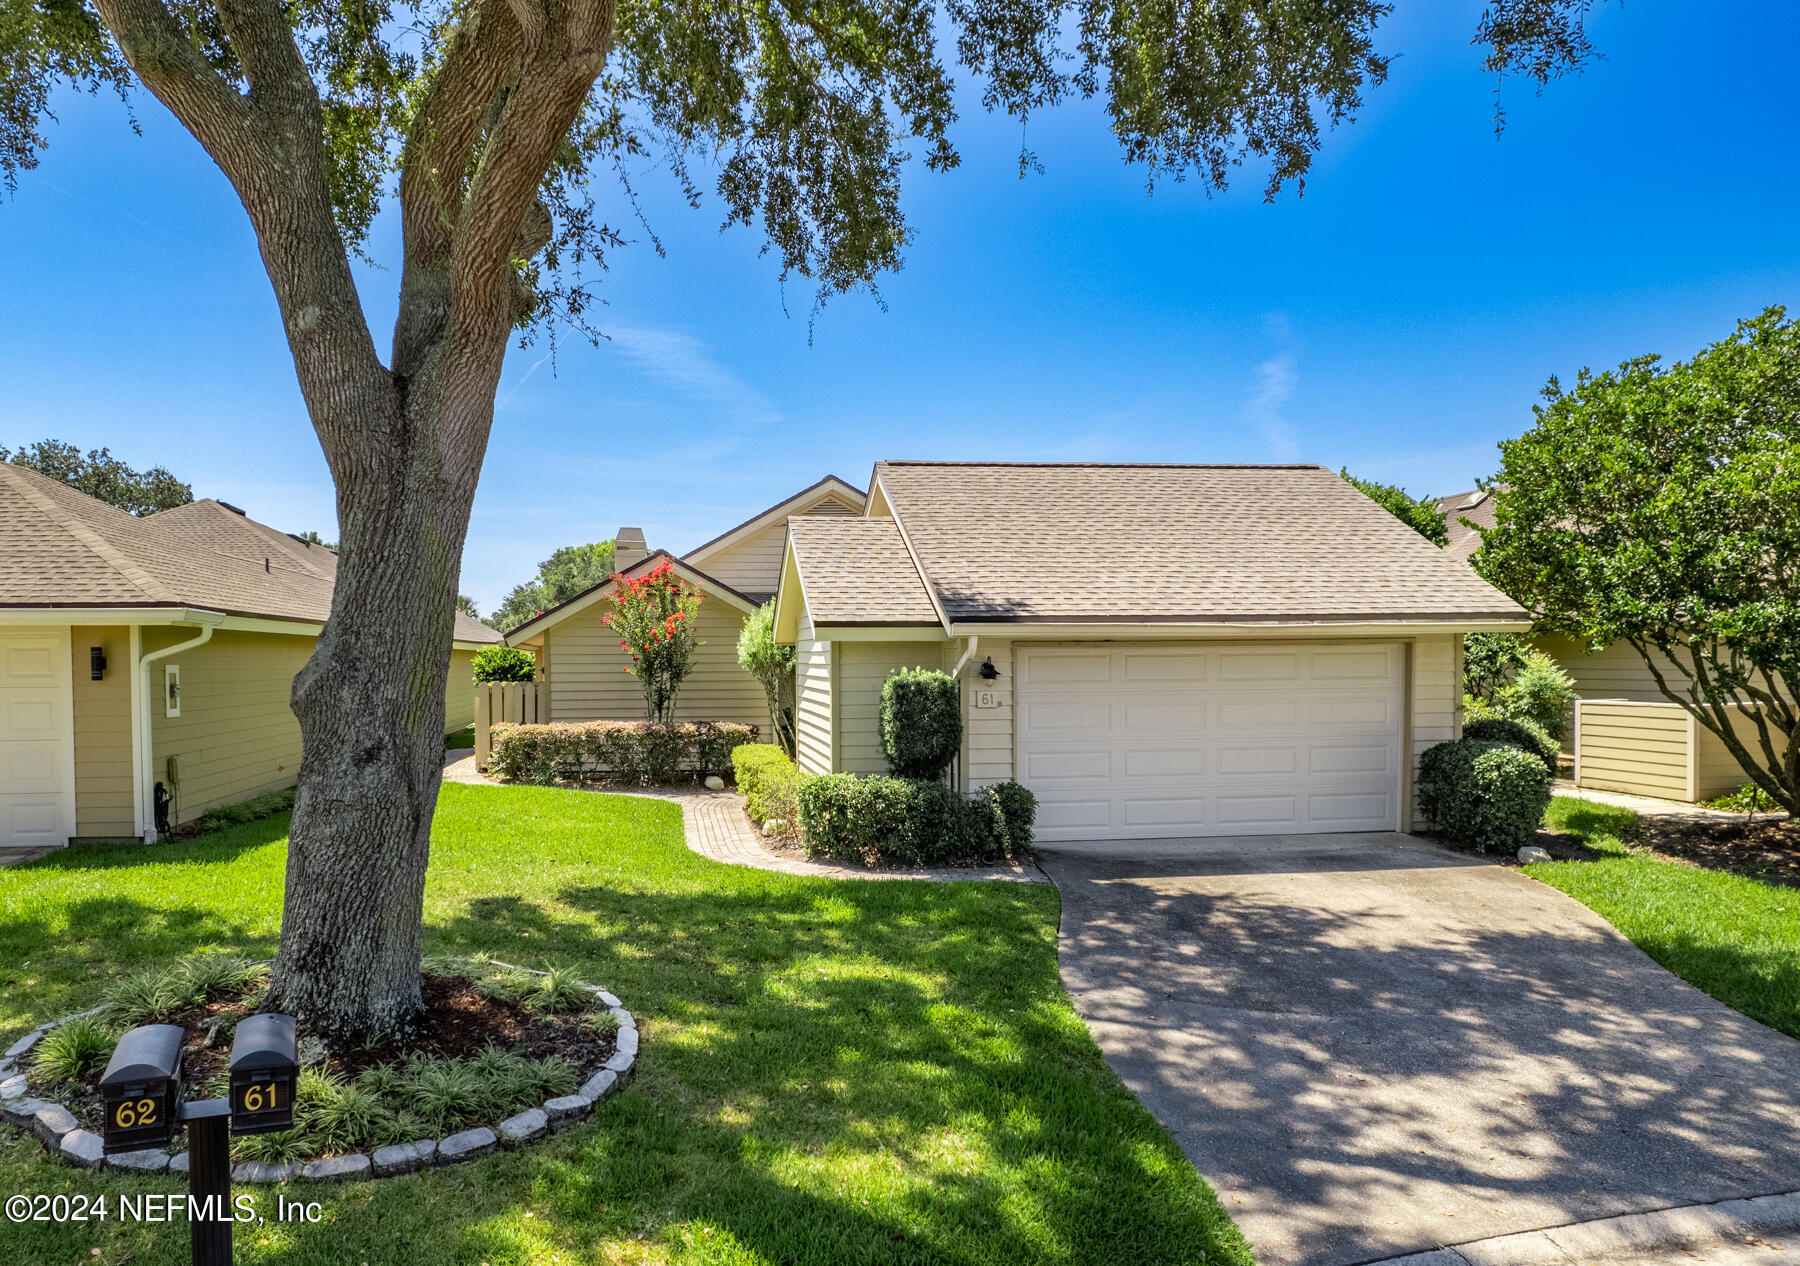 Ponte Vedra Beach, FL home for sale located at 61 Troon Blvd, Ponte Vedra Beach, FL 32082